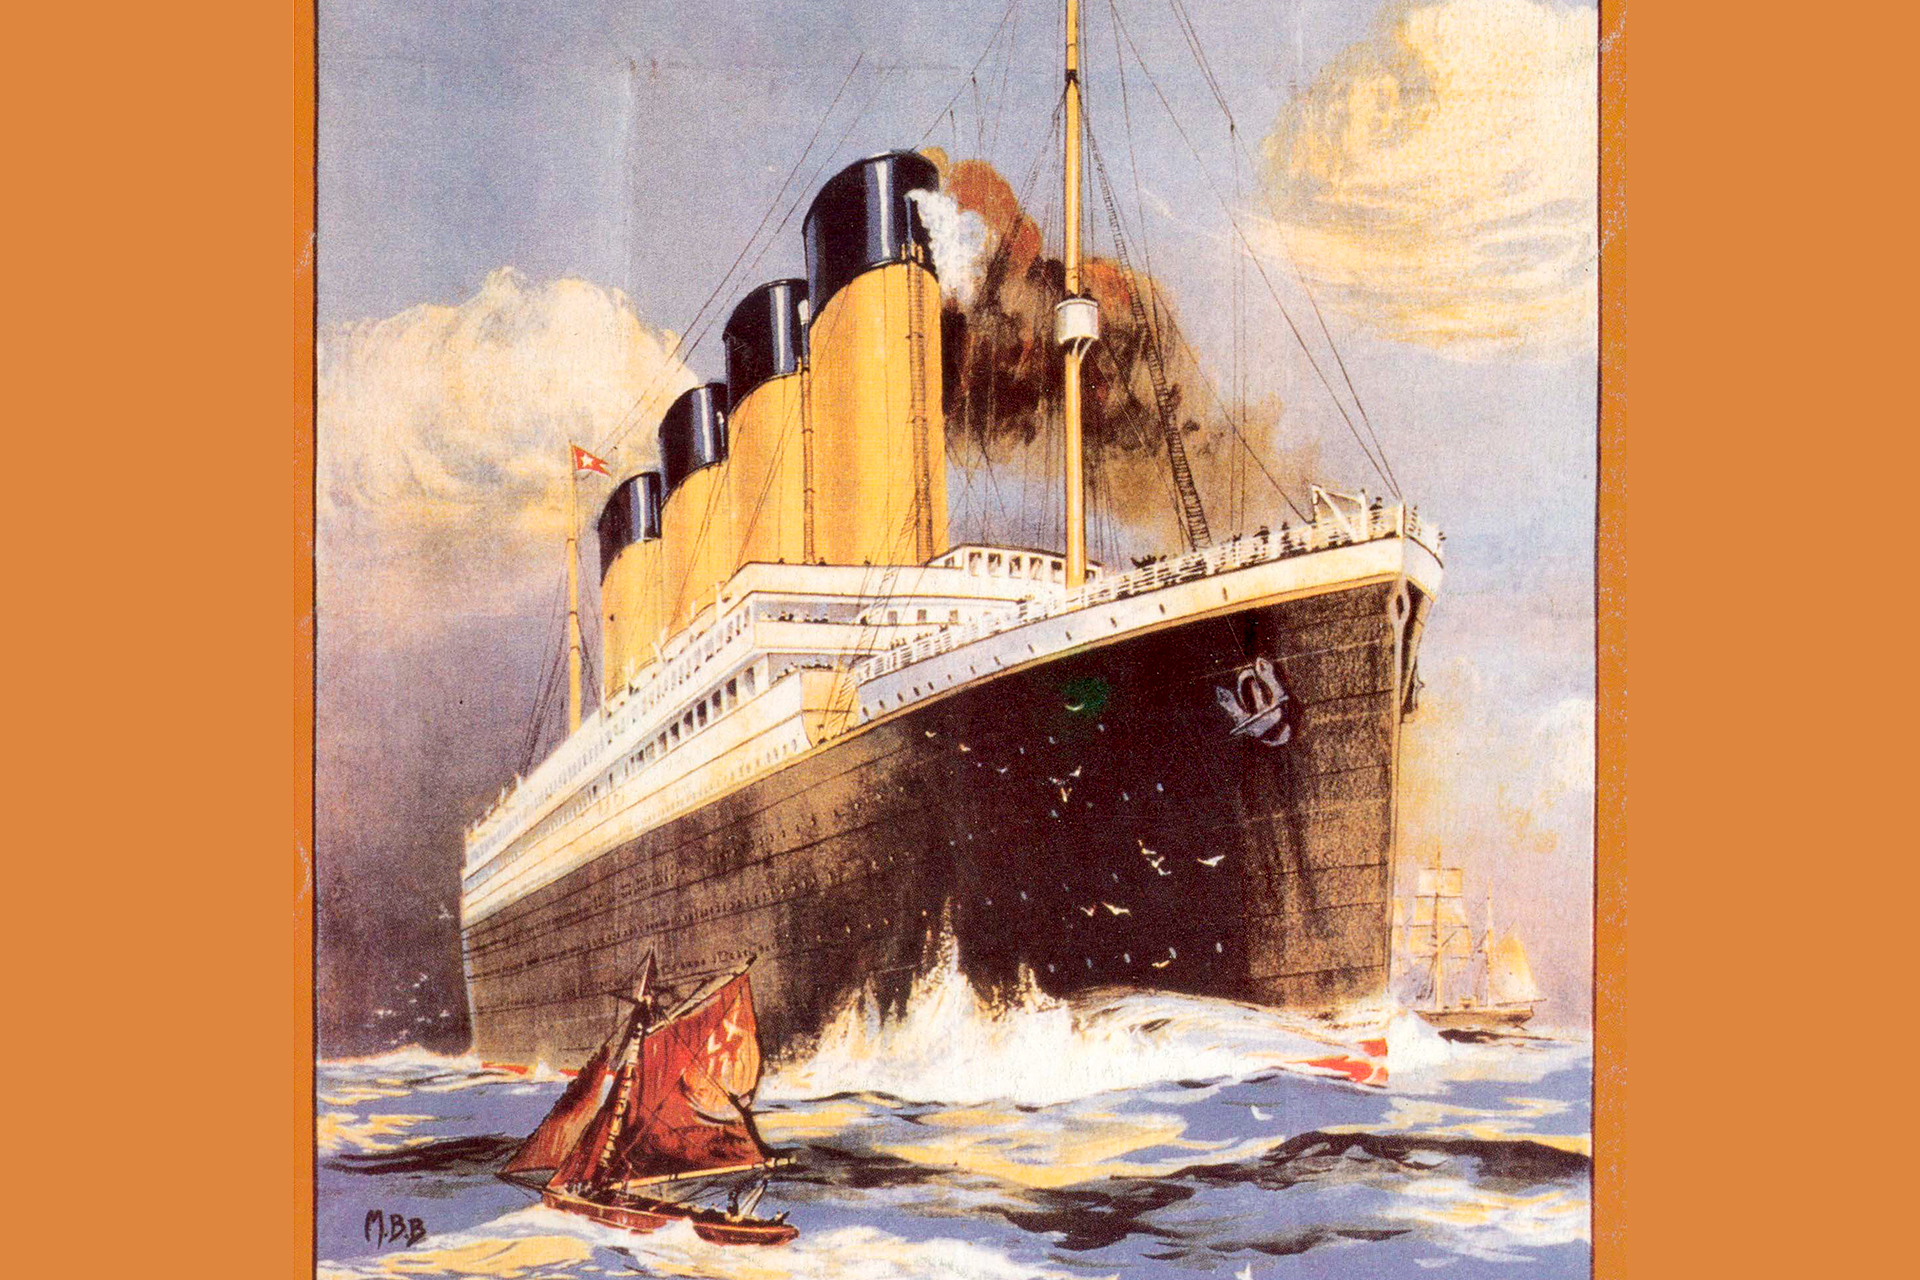 TIME for Kids | On Board the Titanic